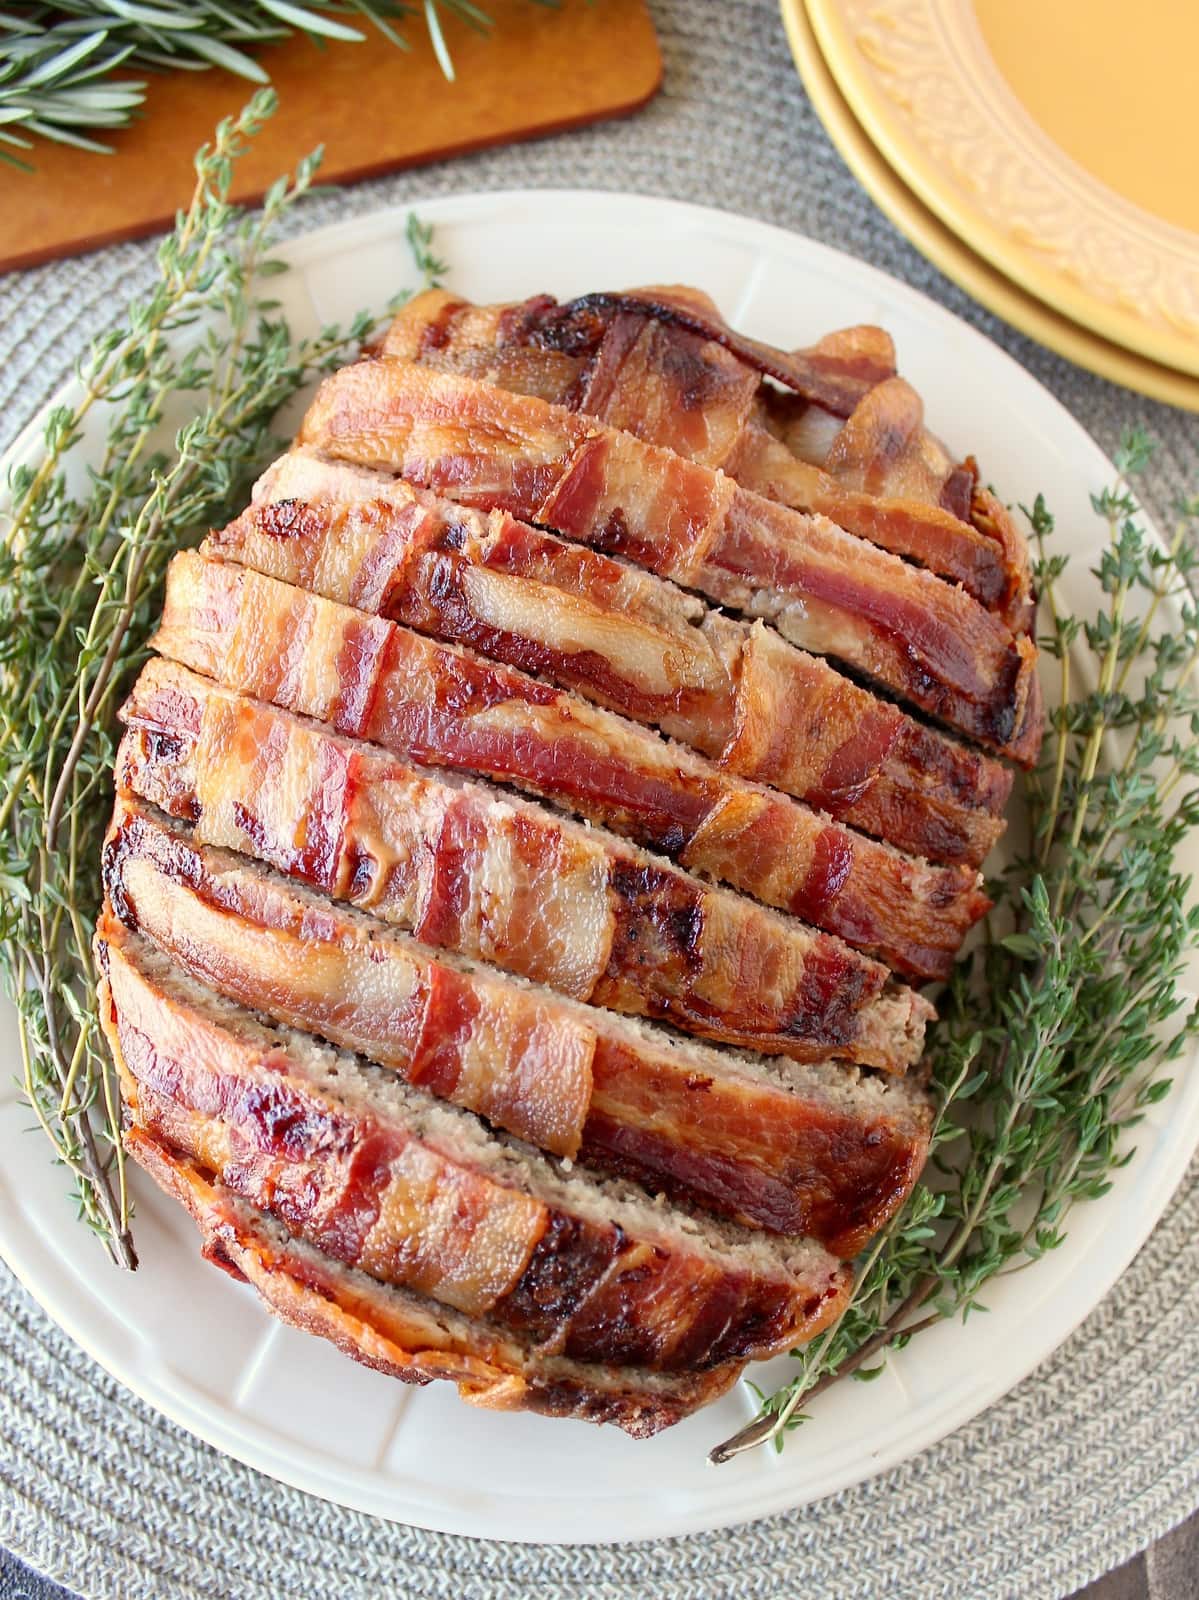 Sliced bacon wrapped meatloaf on plate with fresh herbs